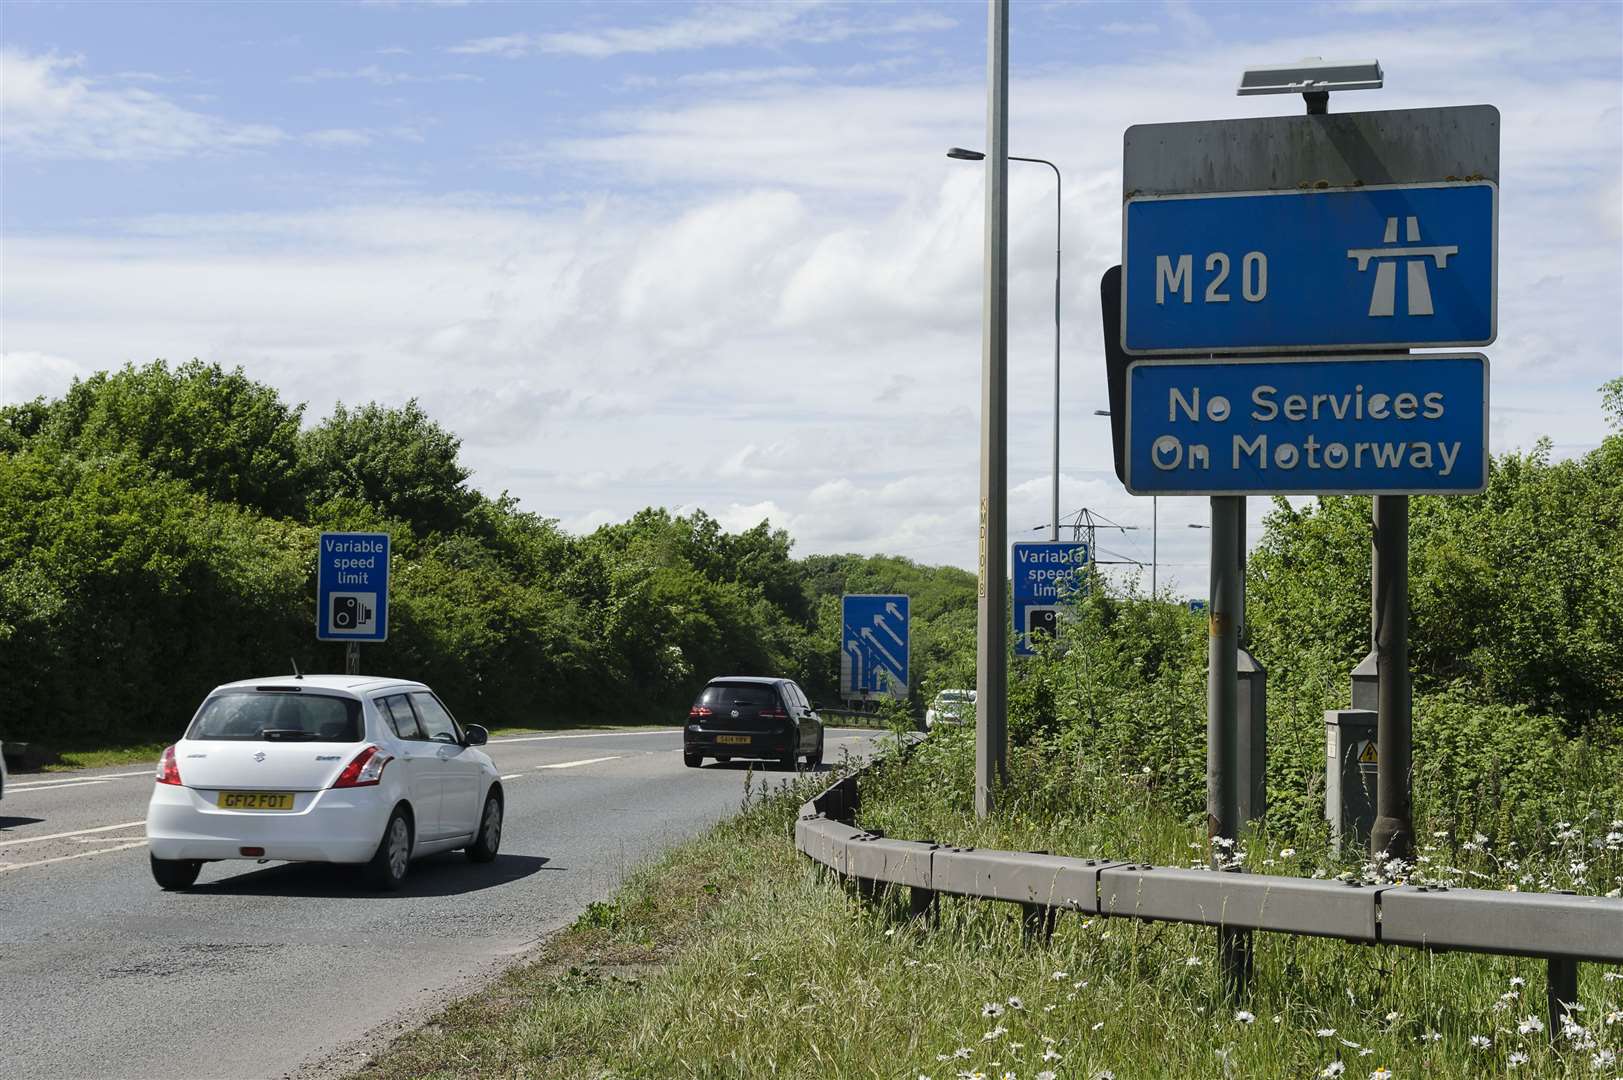 Junction 7 (A249) off the M20